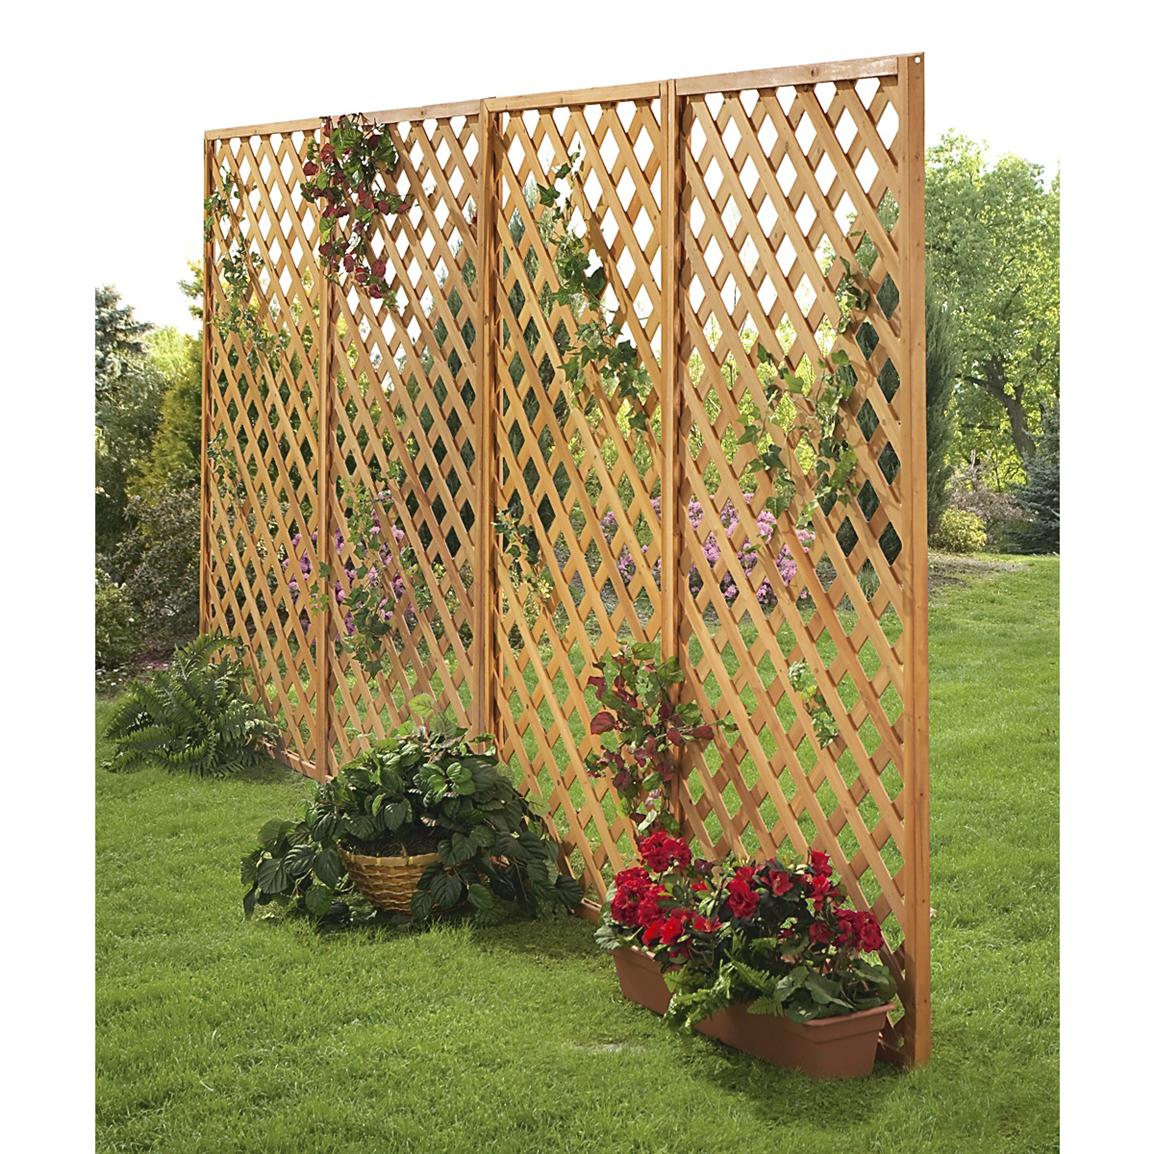 2 Wooden Garden Fence Panels - 131146, Patio Furniture at Sportsman's Guide